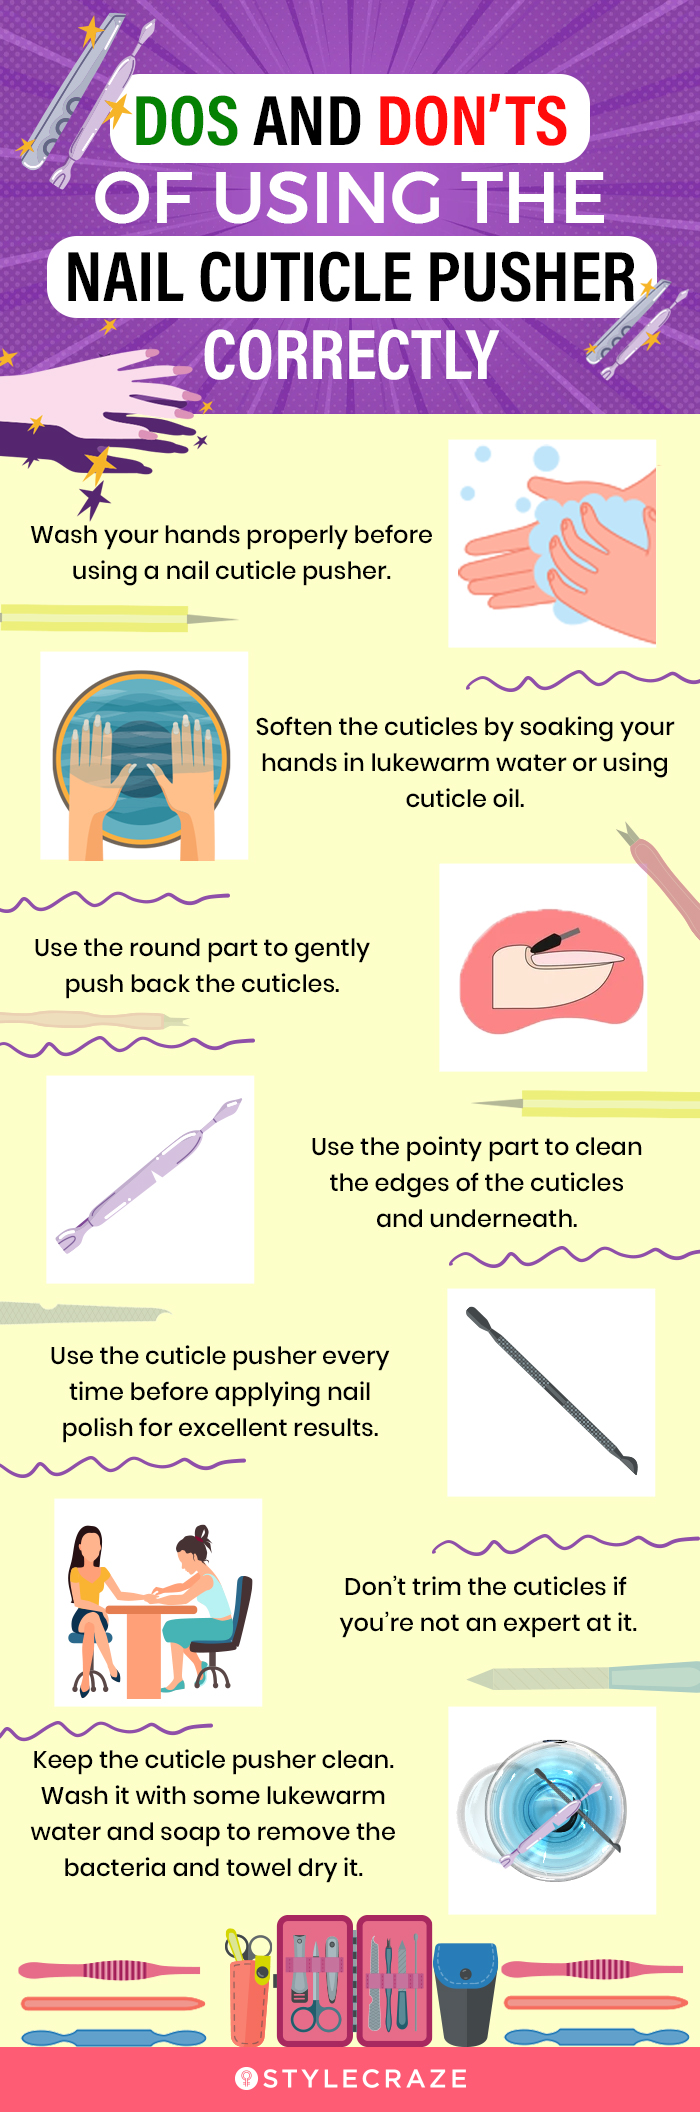 Do’s and Don’ts Of Using The Nail Cuticle Pusher Correctly [infographic]